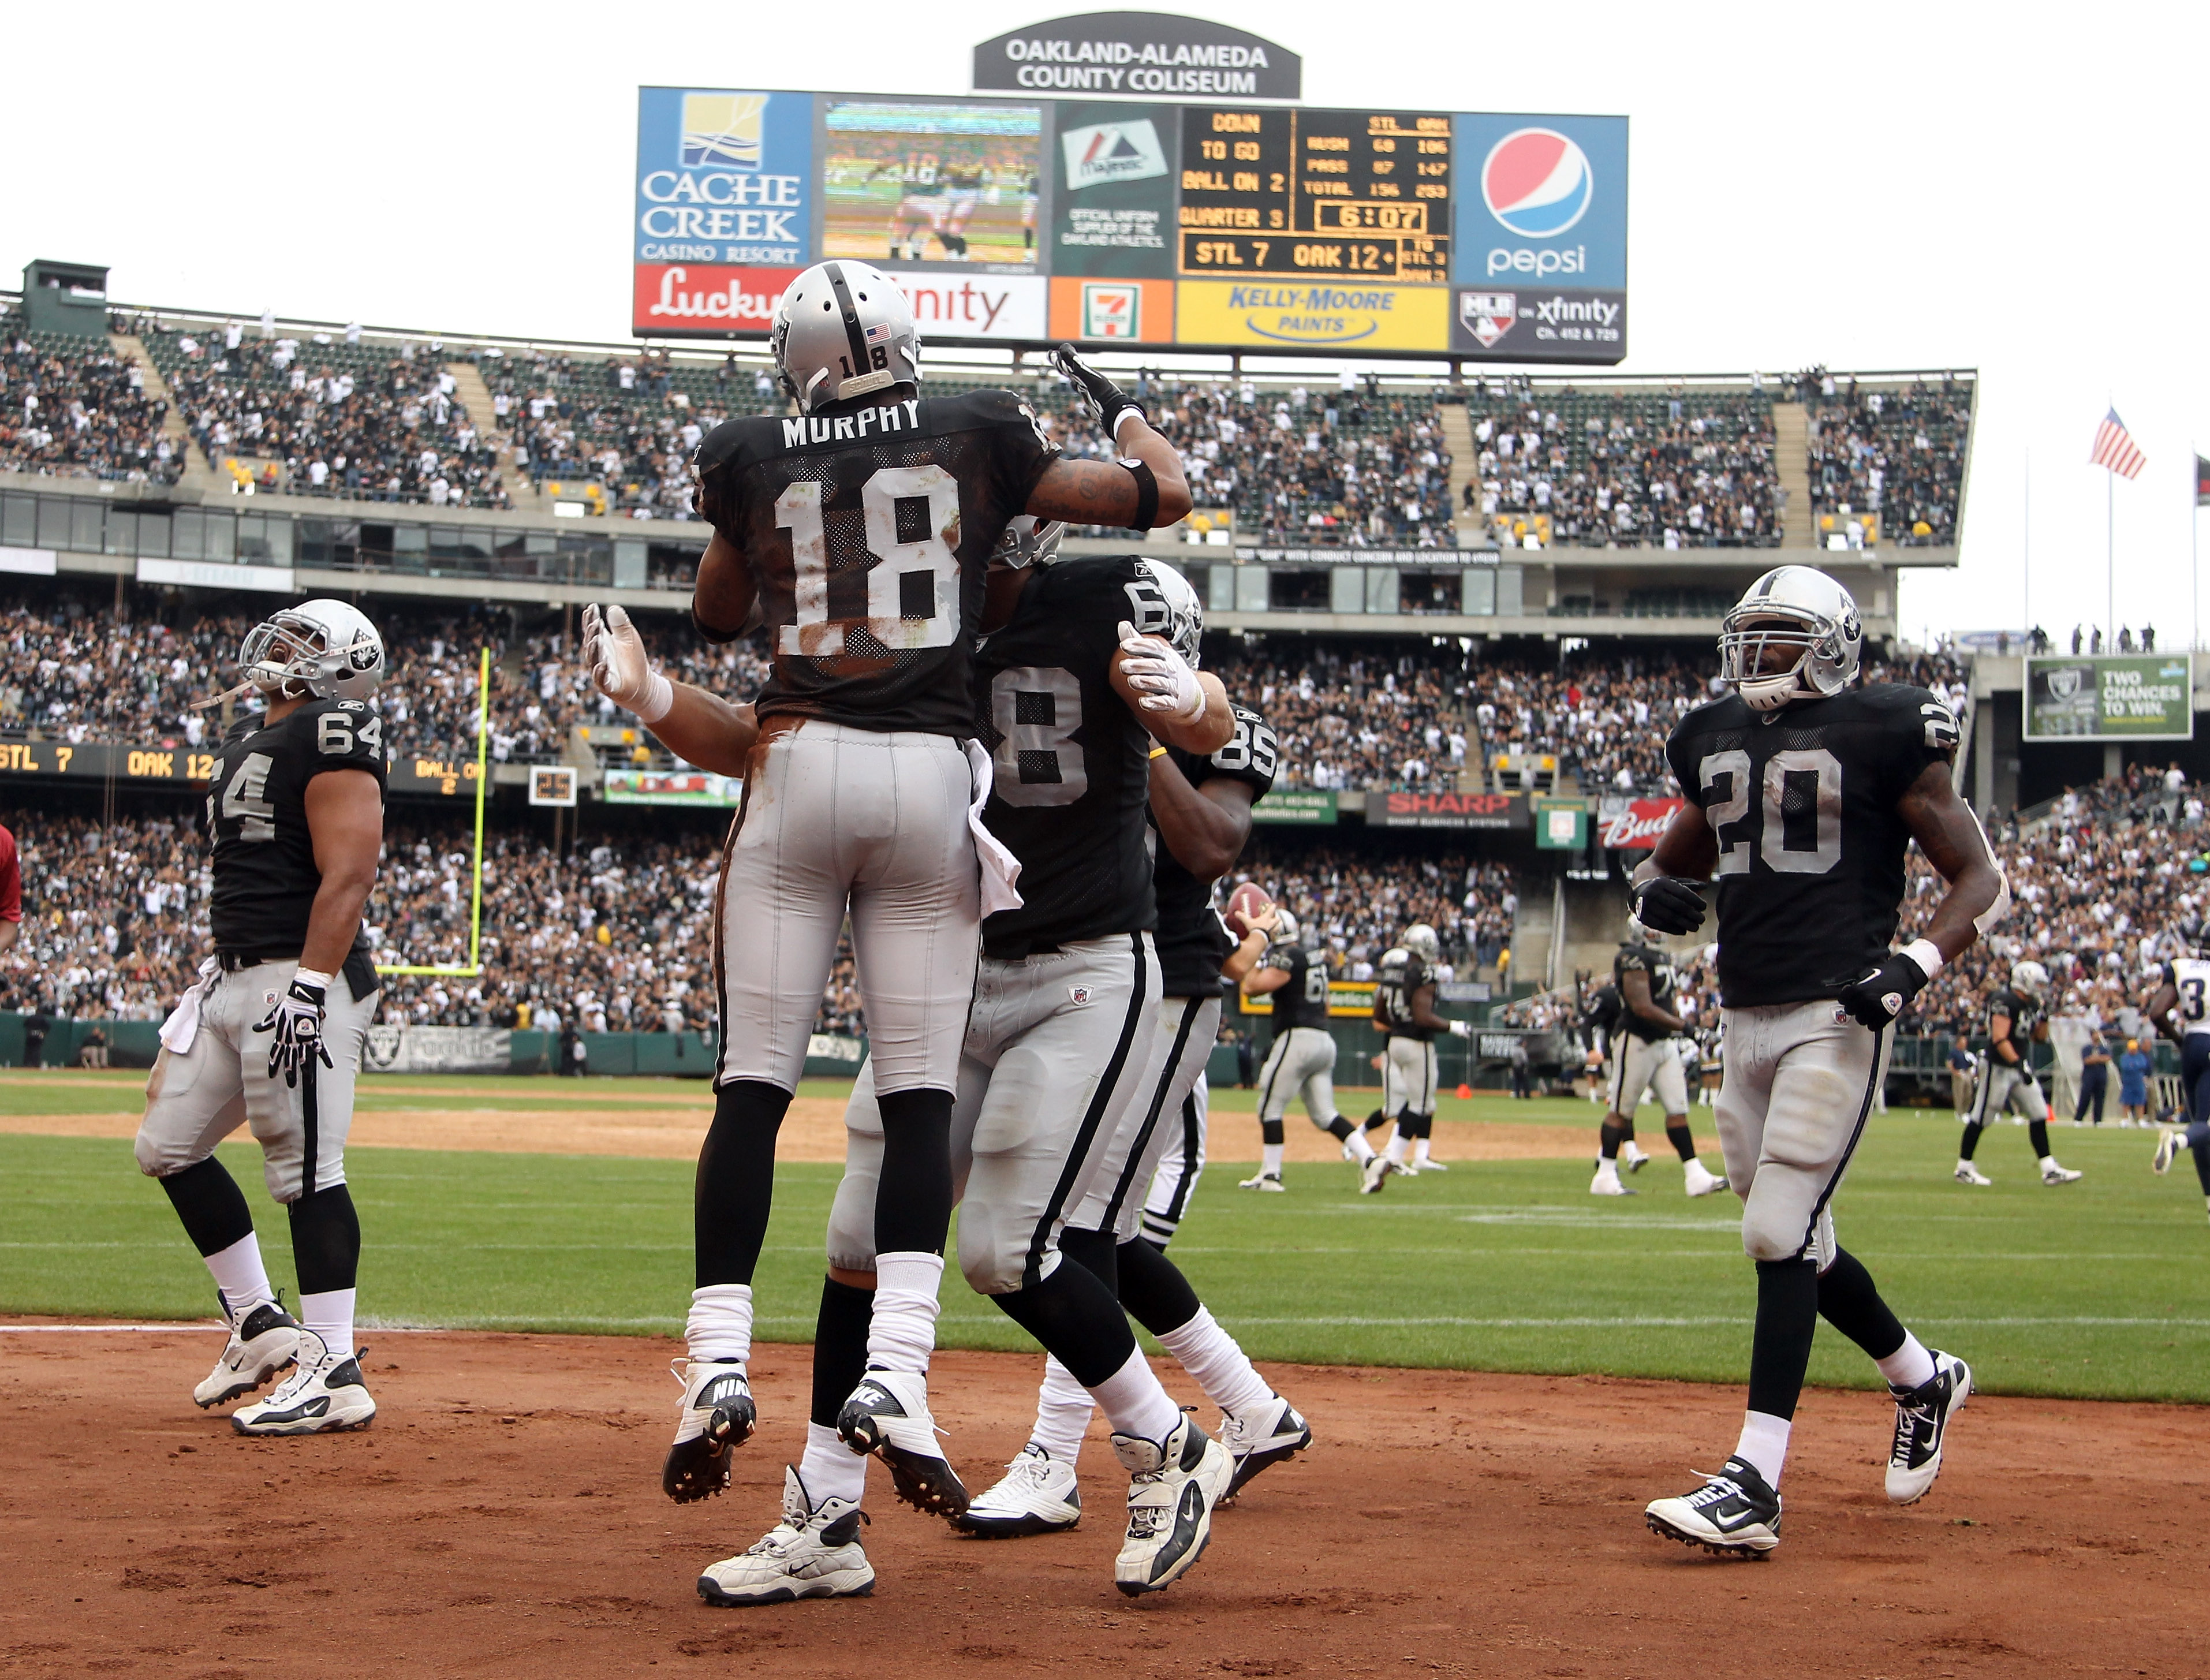 OAKLAND, CA - SEPTEMBER 19:  Louis Murphy #18 of the Oakland Raiders is congratulated by teammates after he scored a touchdown during their game against the St. Louis Rams at the Oakland-Alameda County Coliseum on September 19, 2010 in Oakland, California